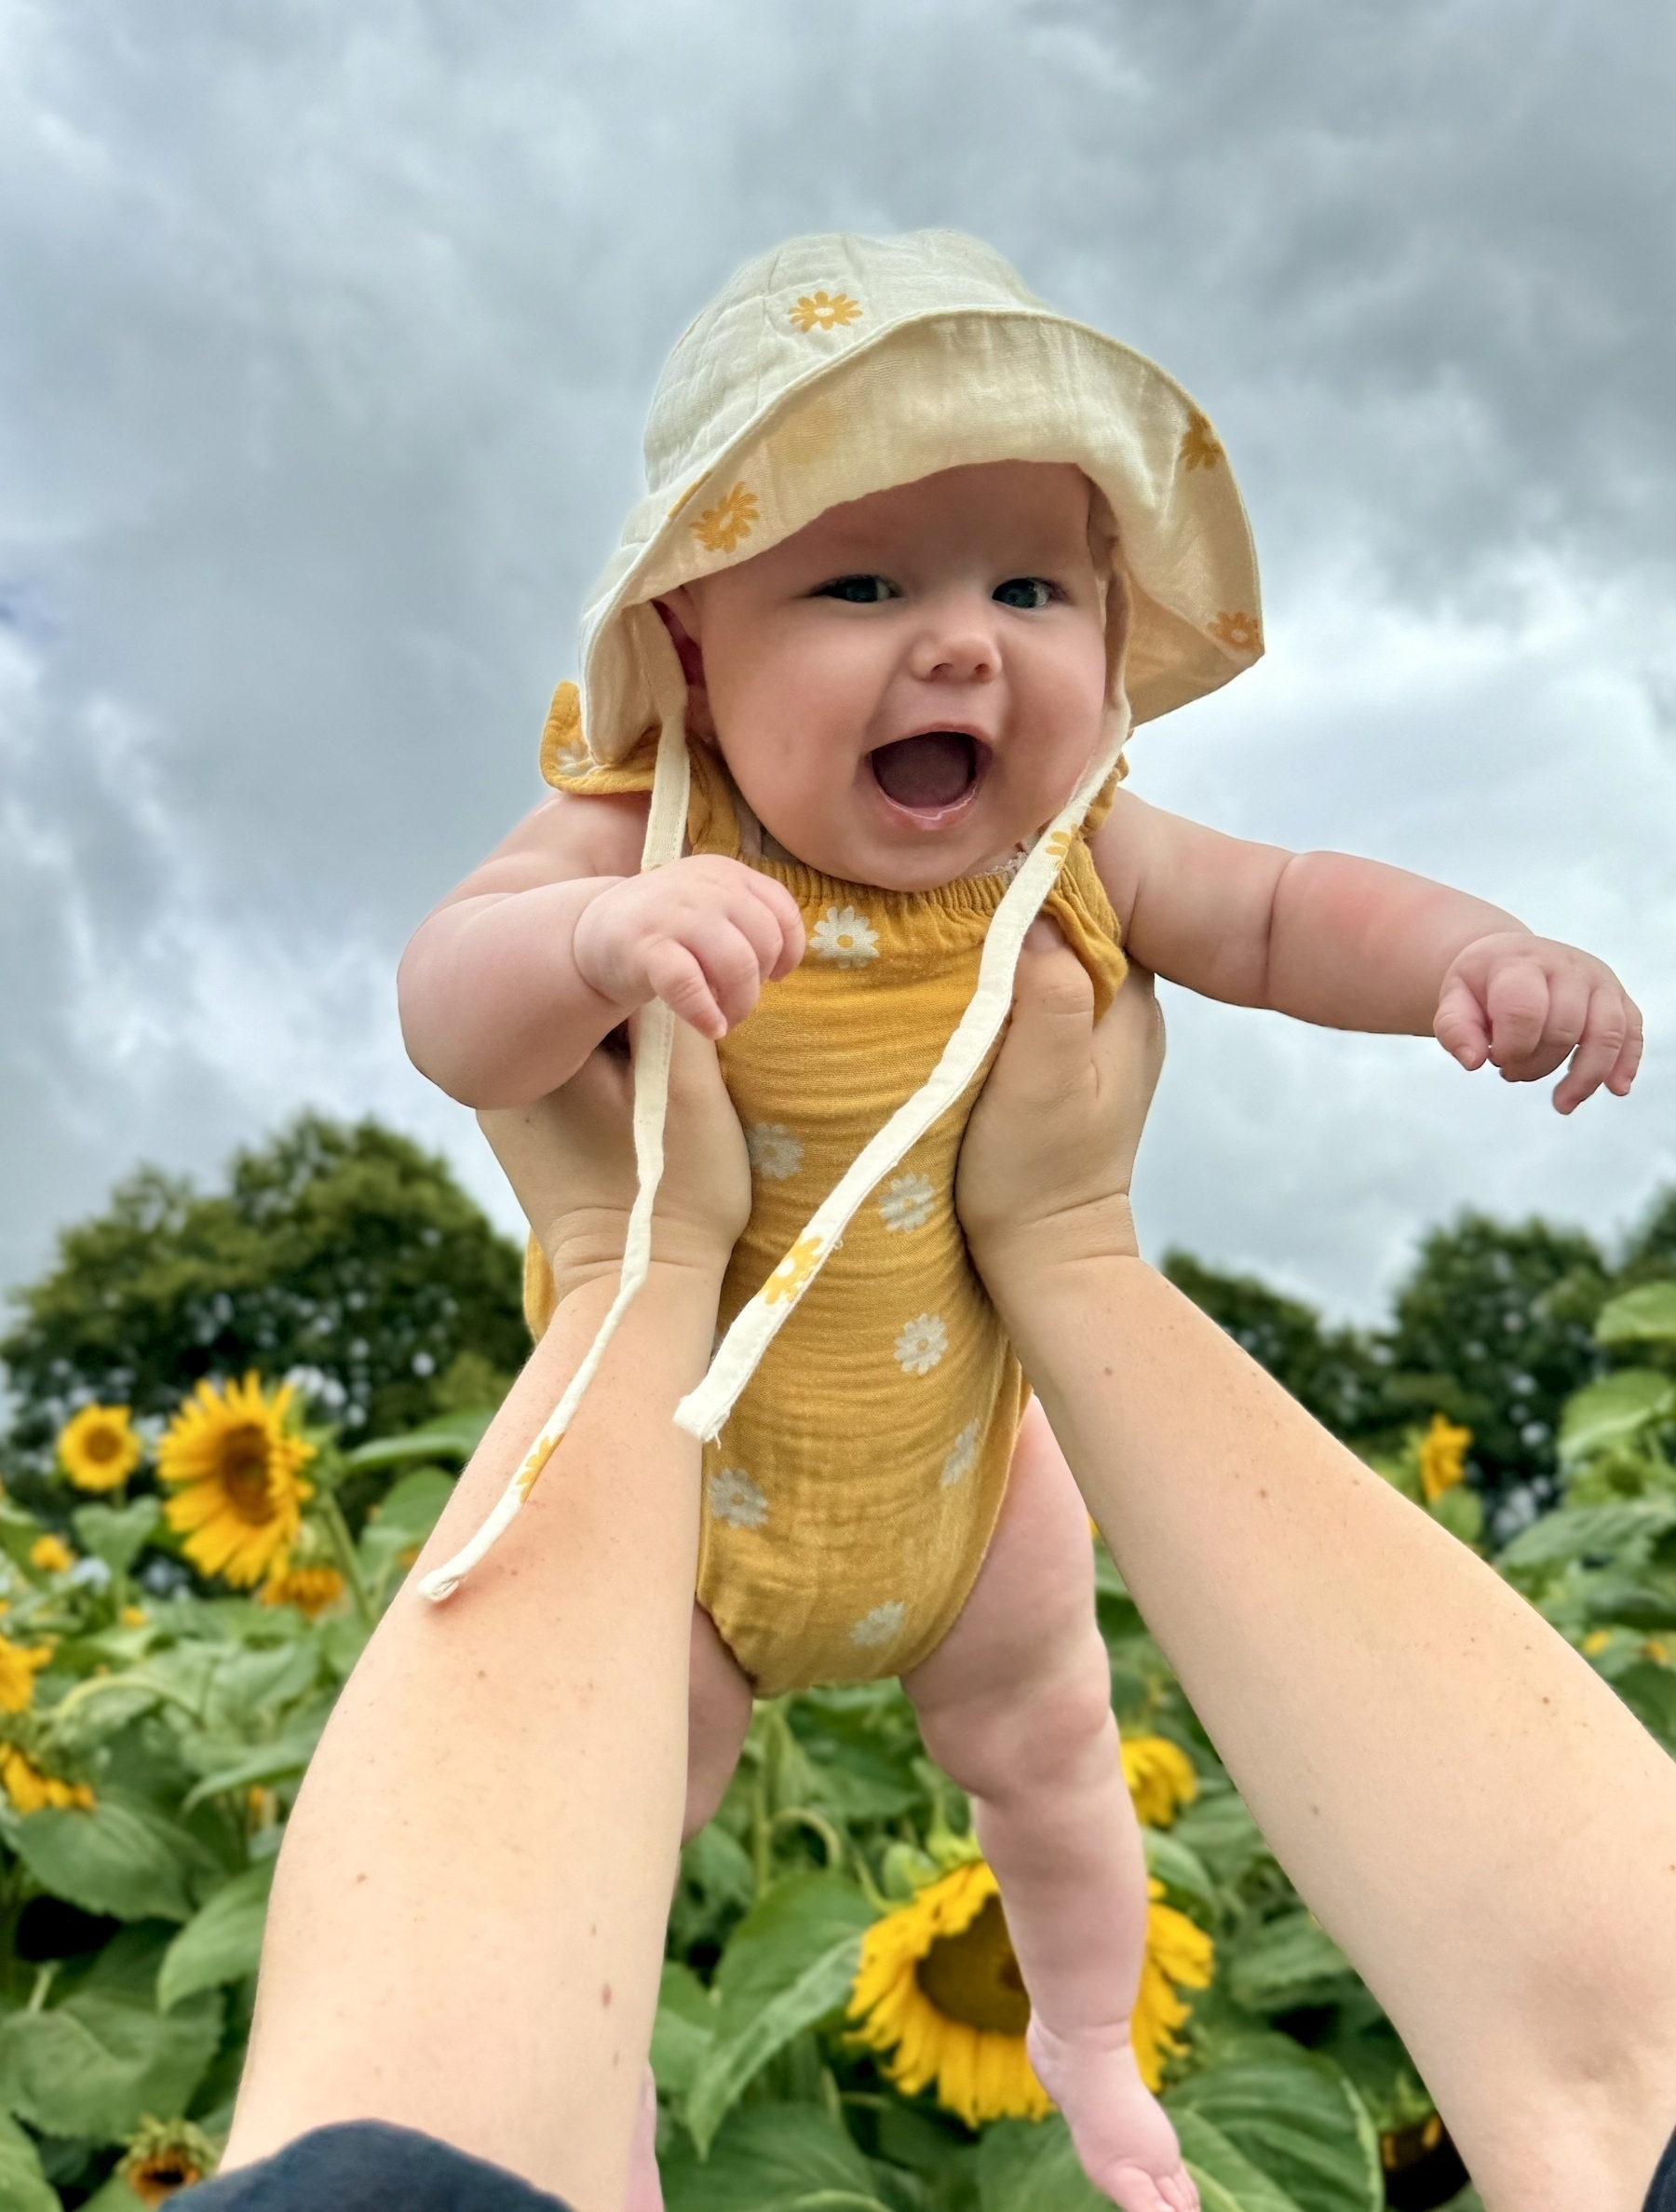 Happy baby held up in a field of sunflowers